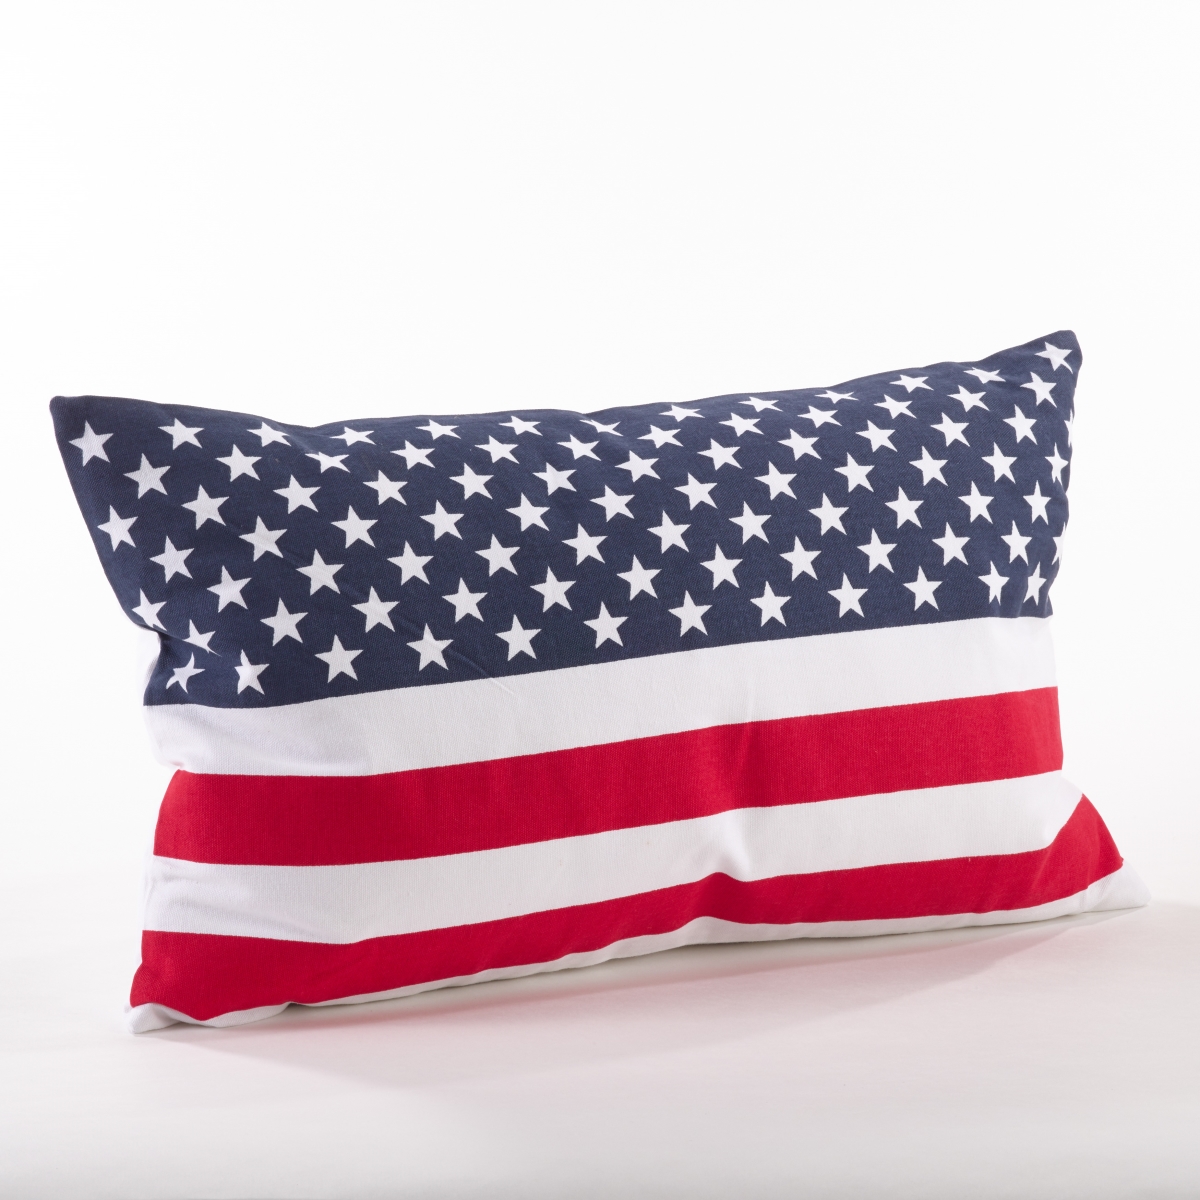 0704p.m1423b 14 X 23 In. American Flag Design Cotton Down Filled Throw Pillow, Multi Color